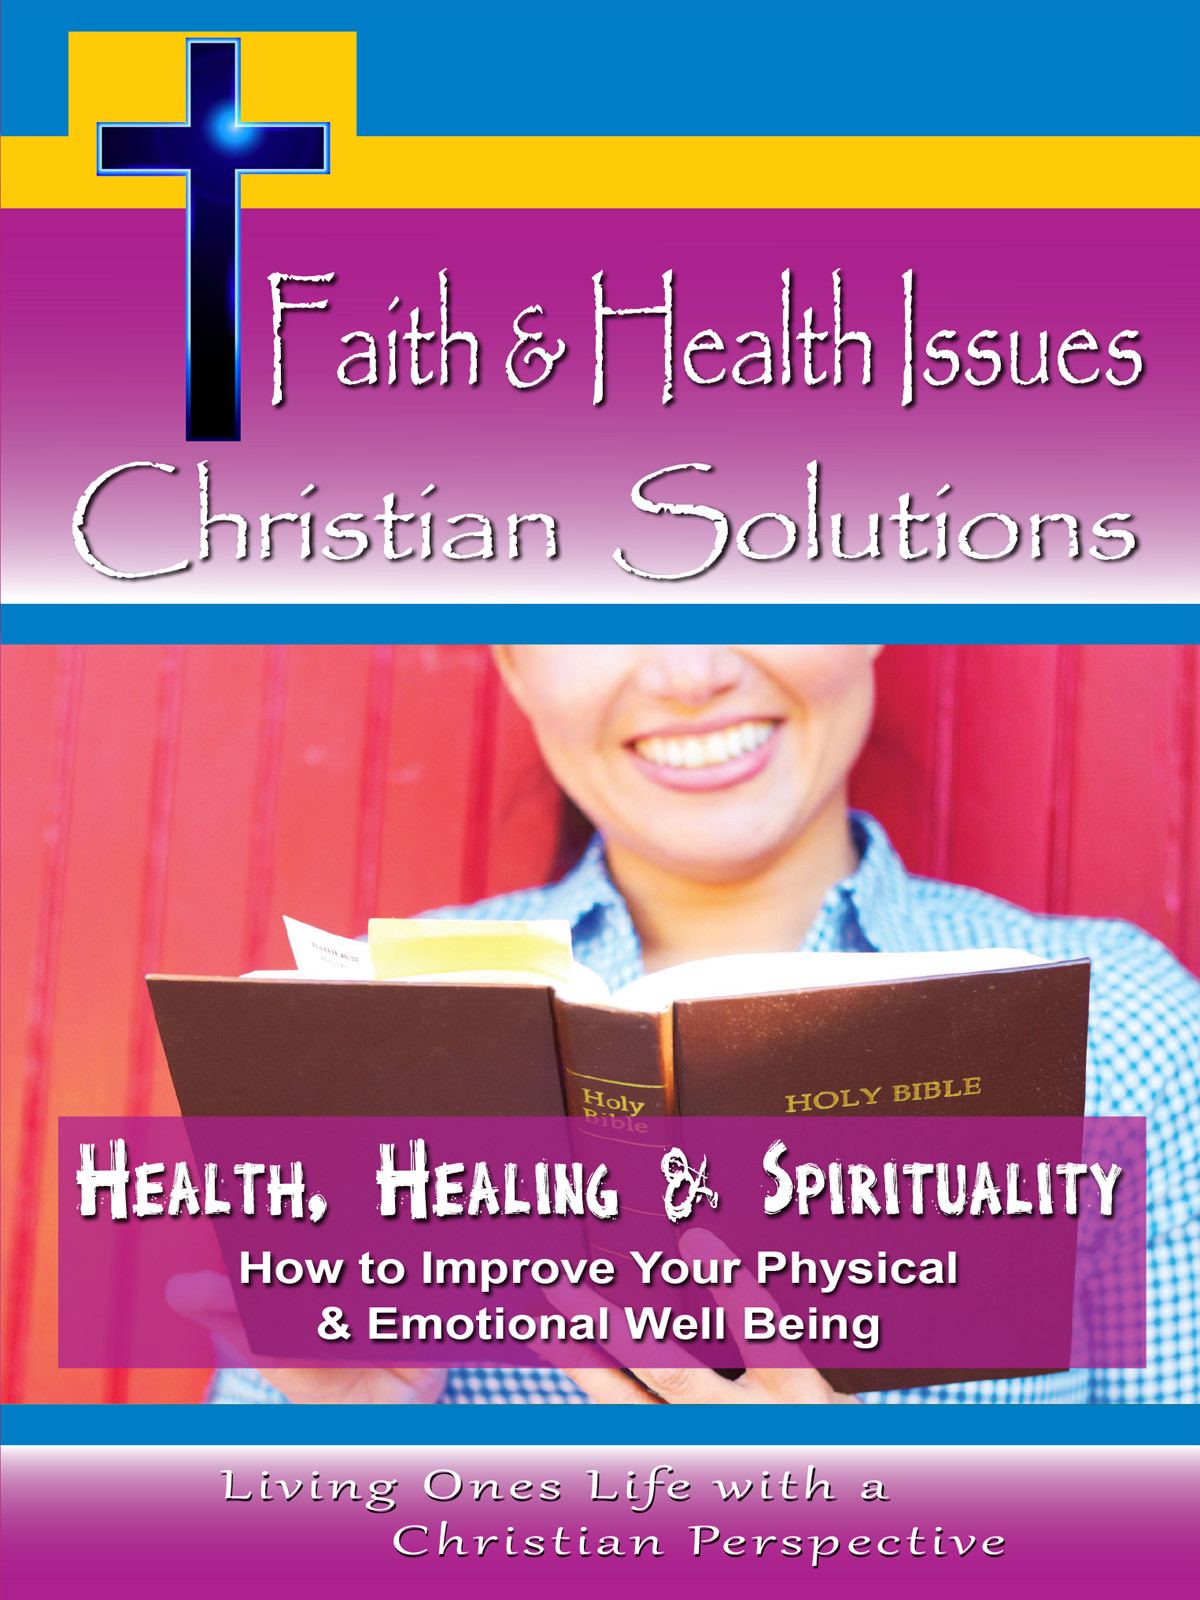 CH10045 - Health, Healing and Spirituality How to Improve Your Physical & Emotional Well Being